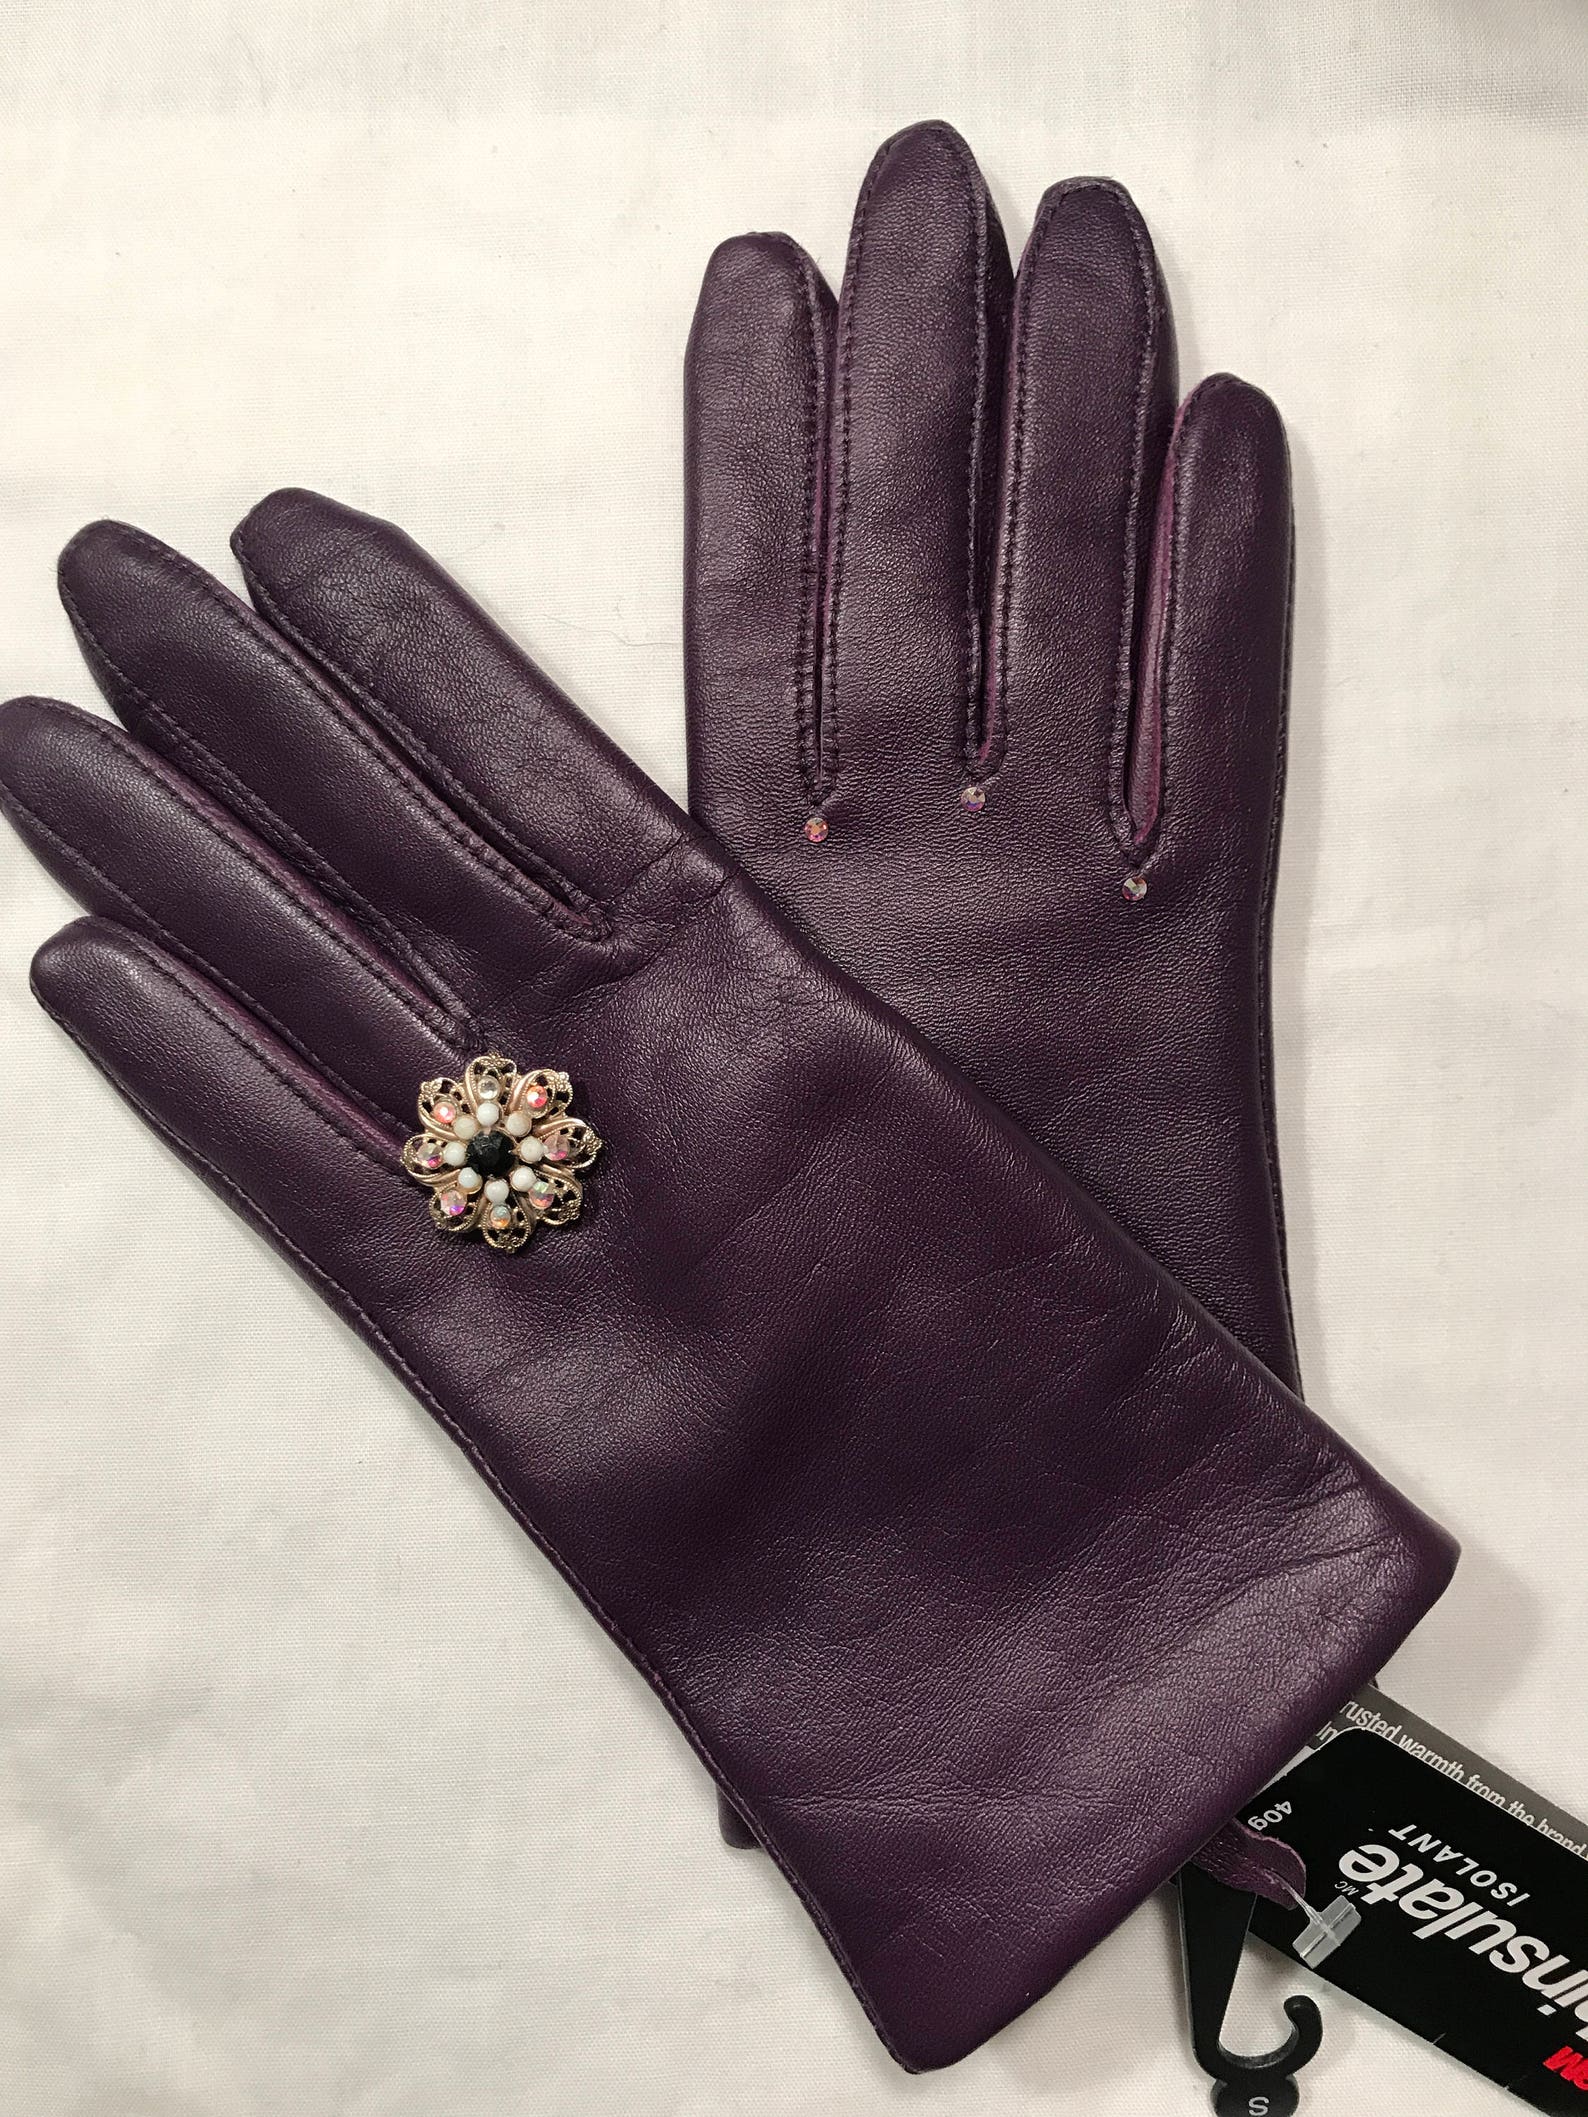 Purple Leather Gloves With Vintage Brooch. - Etsy